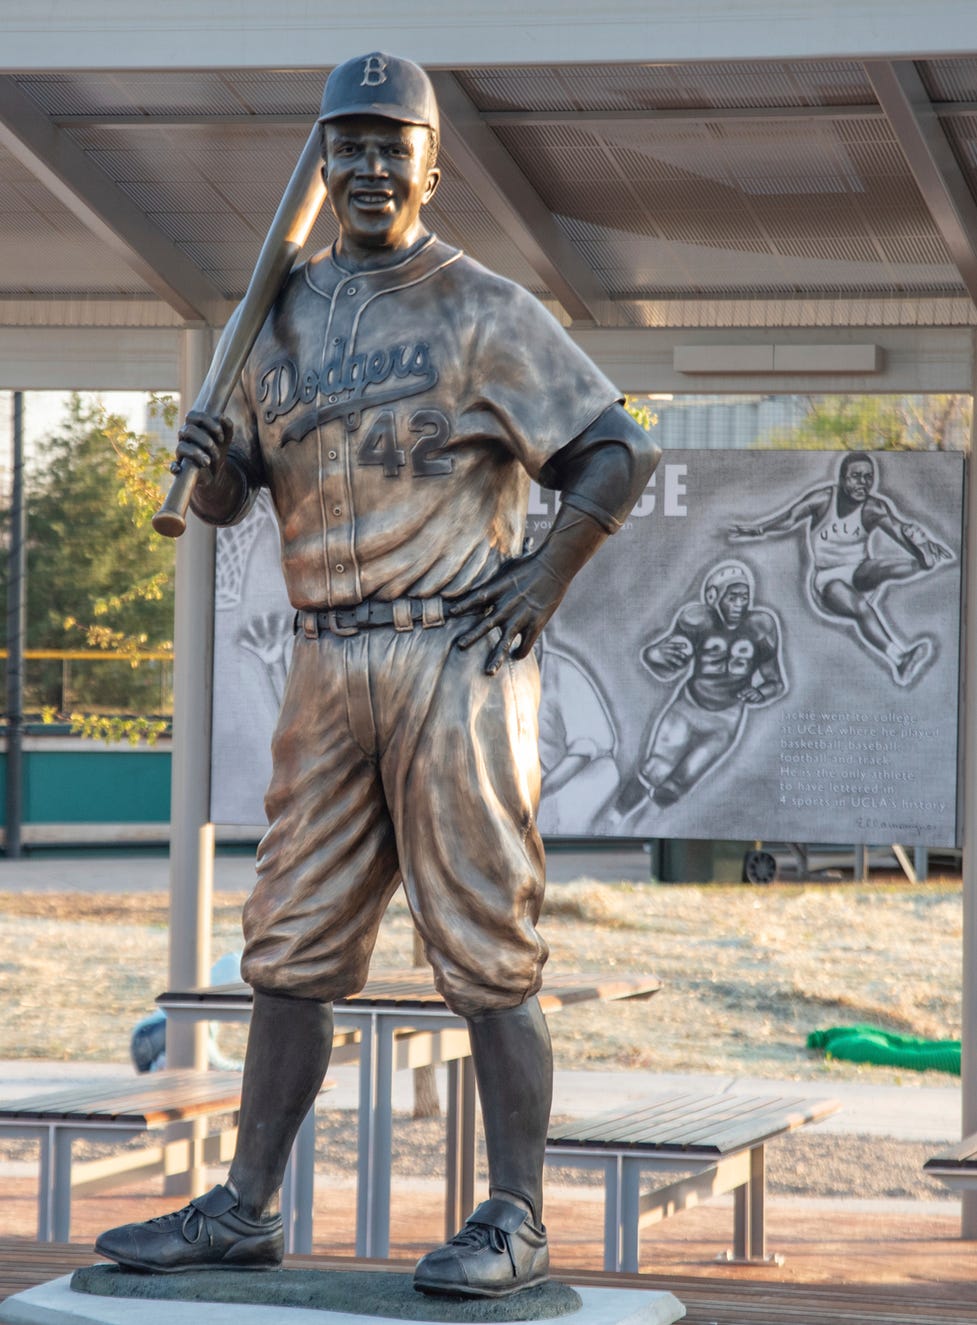 Burned remnants of Jackie Robinson statue found after theft from public park in Kansas